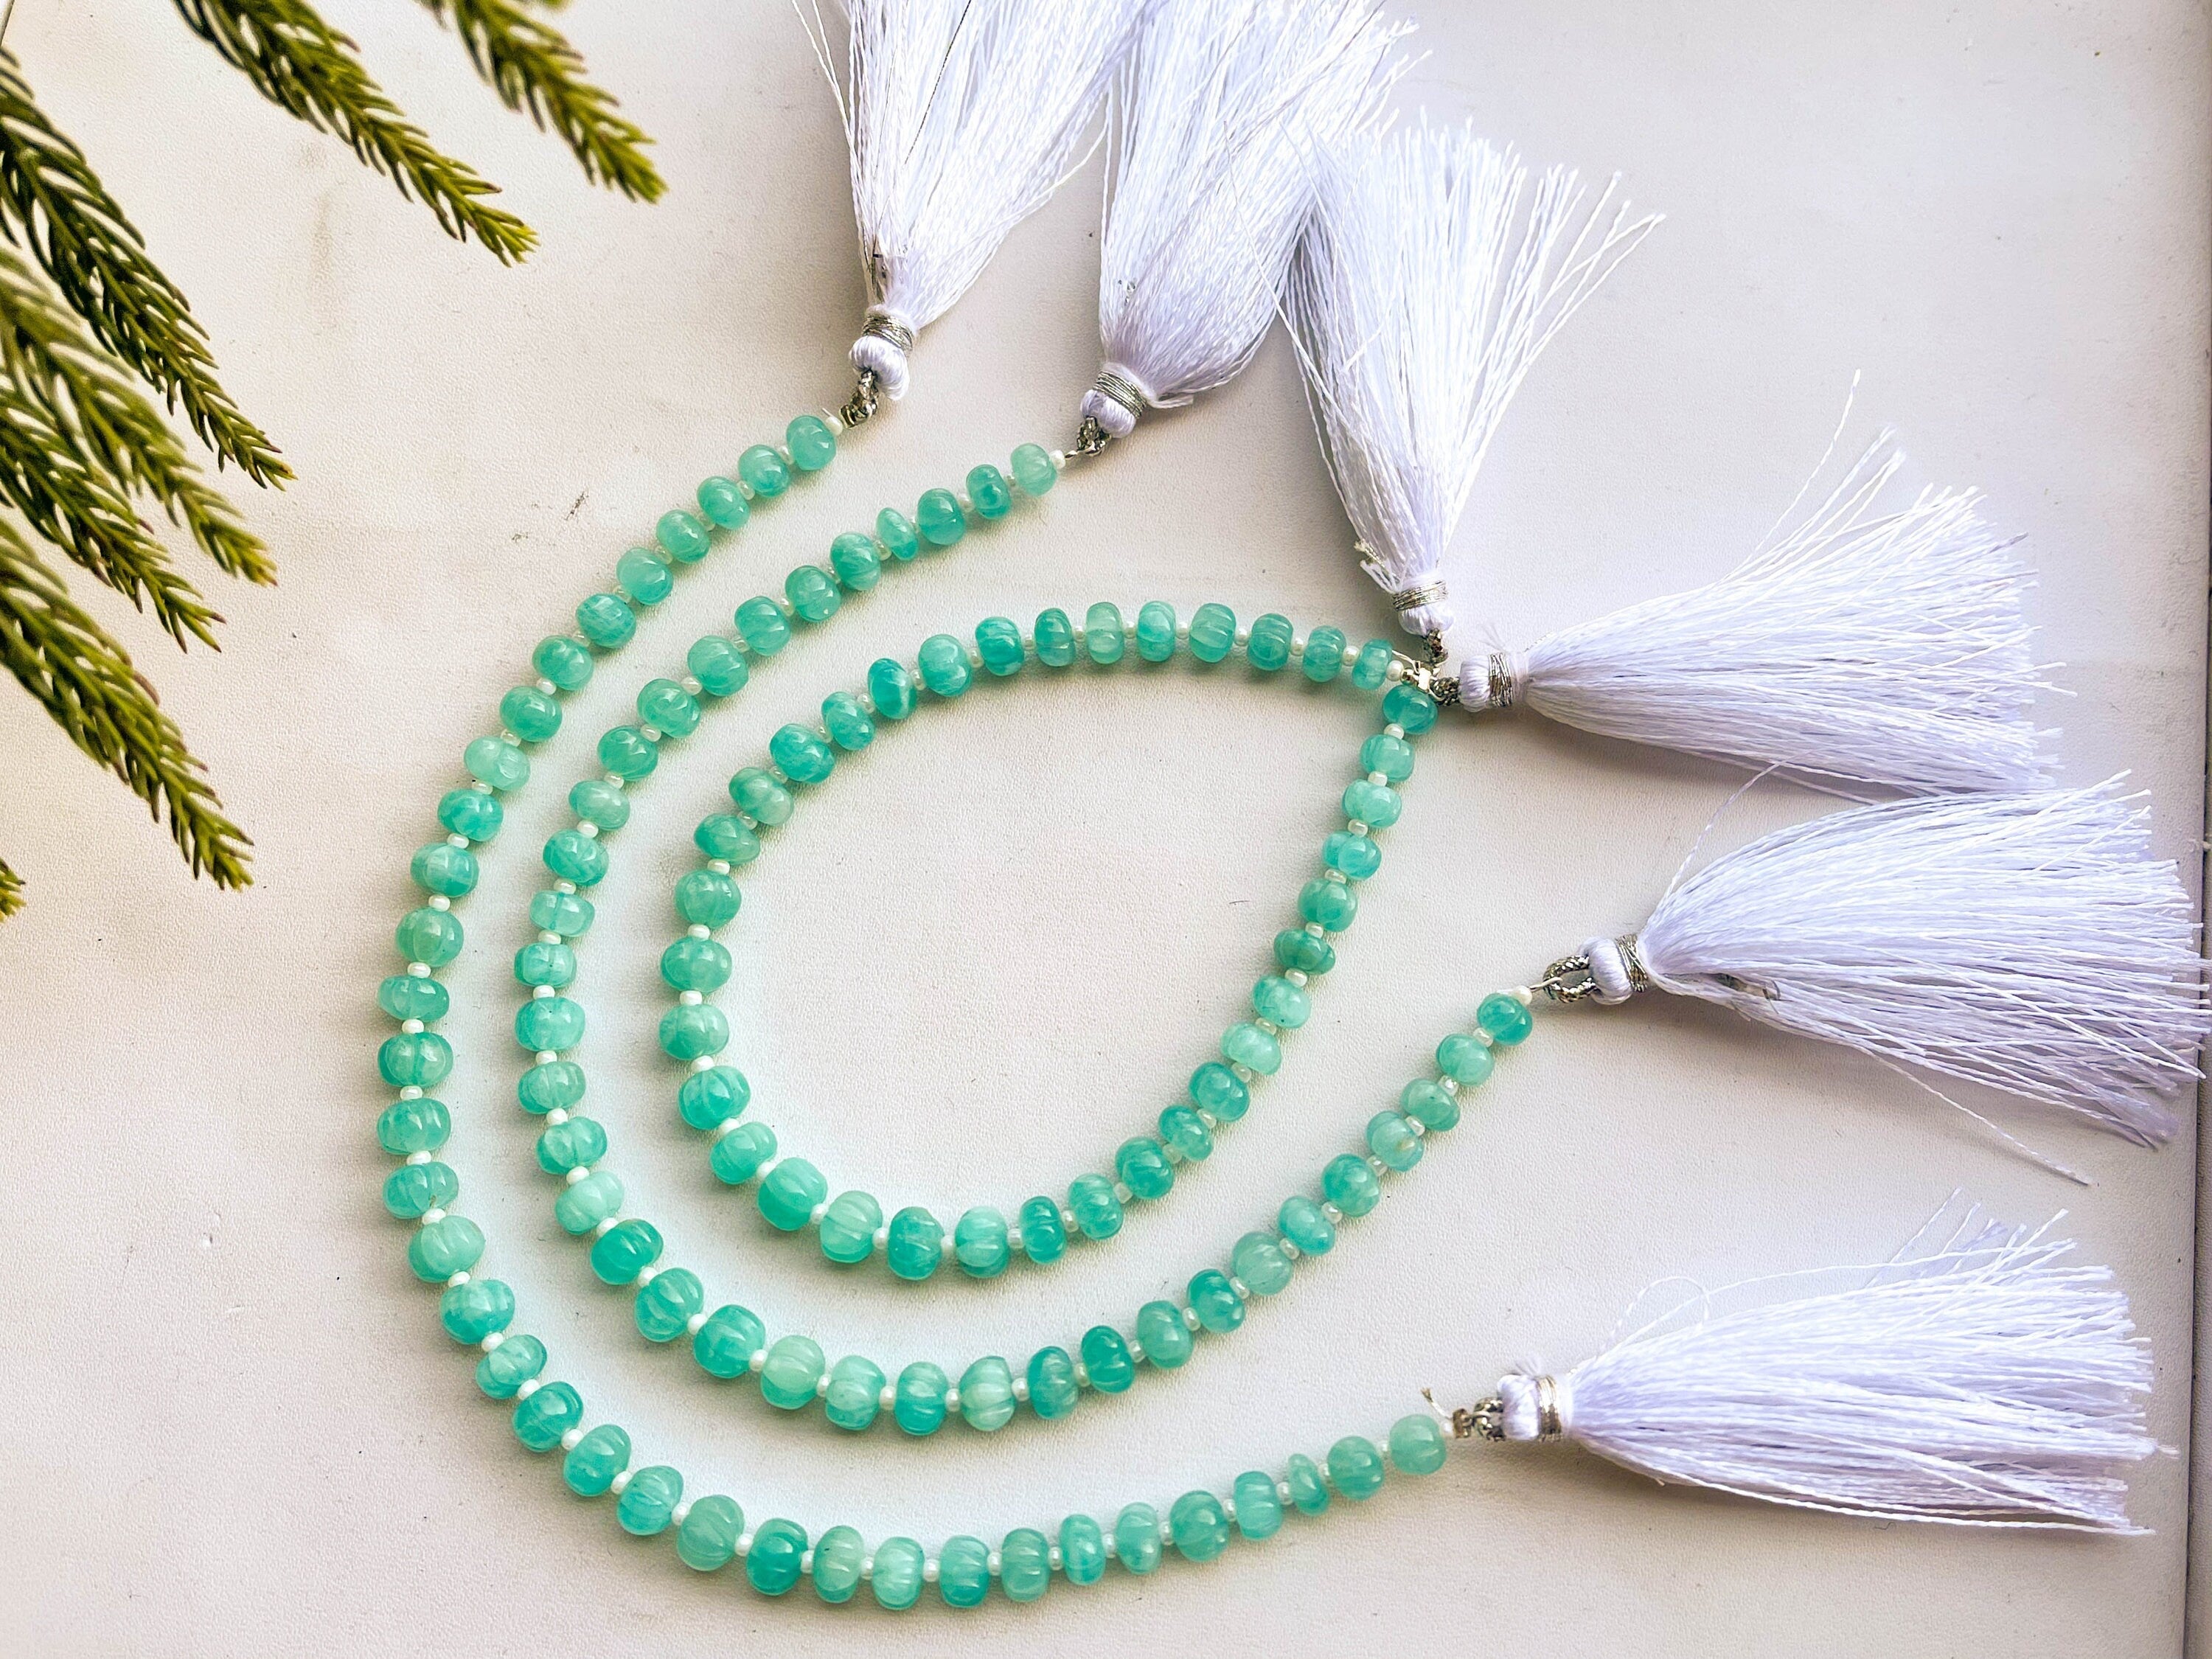 8 Inch AMAZONITE Melons Hand Carved beads | 6mm to 7mm | Natural Gemstone Beads | Beadsforyourjewellery Beadsforyourjewelry